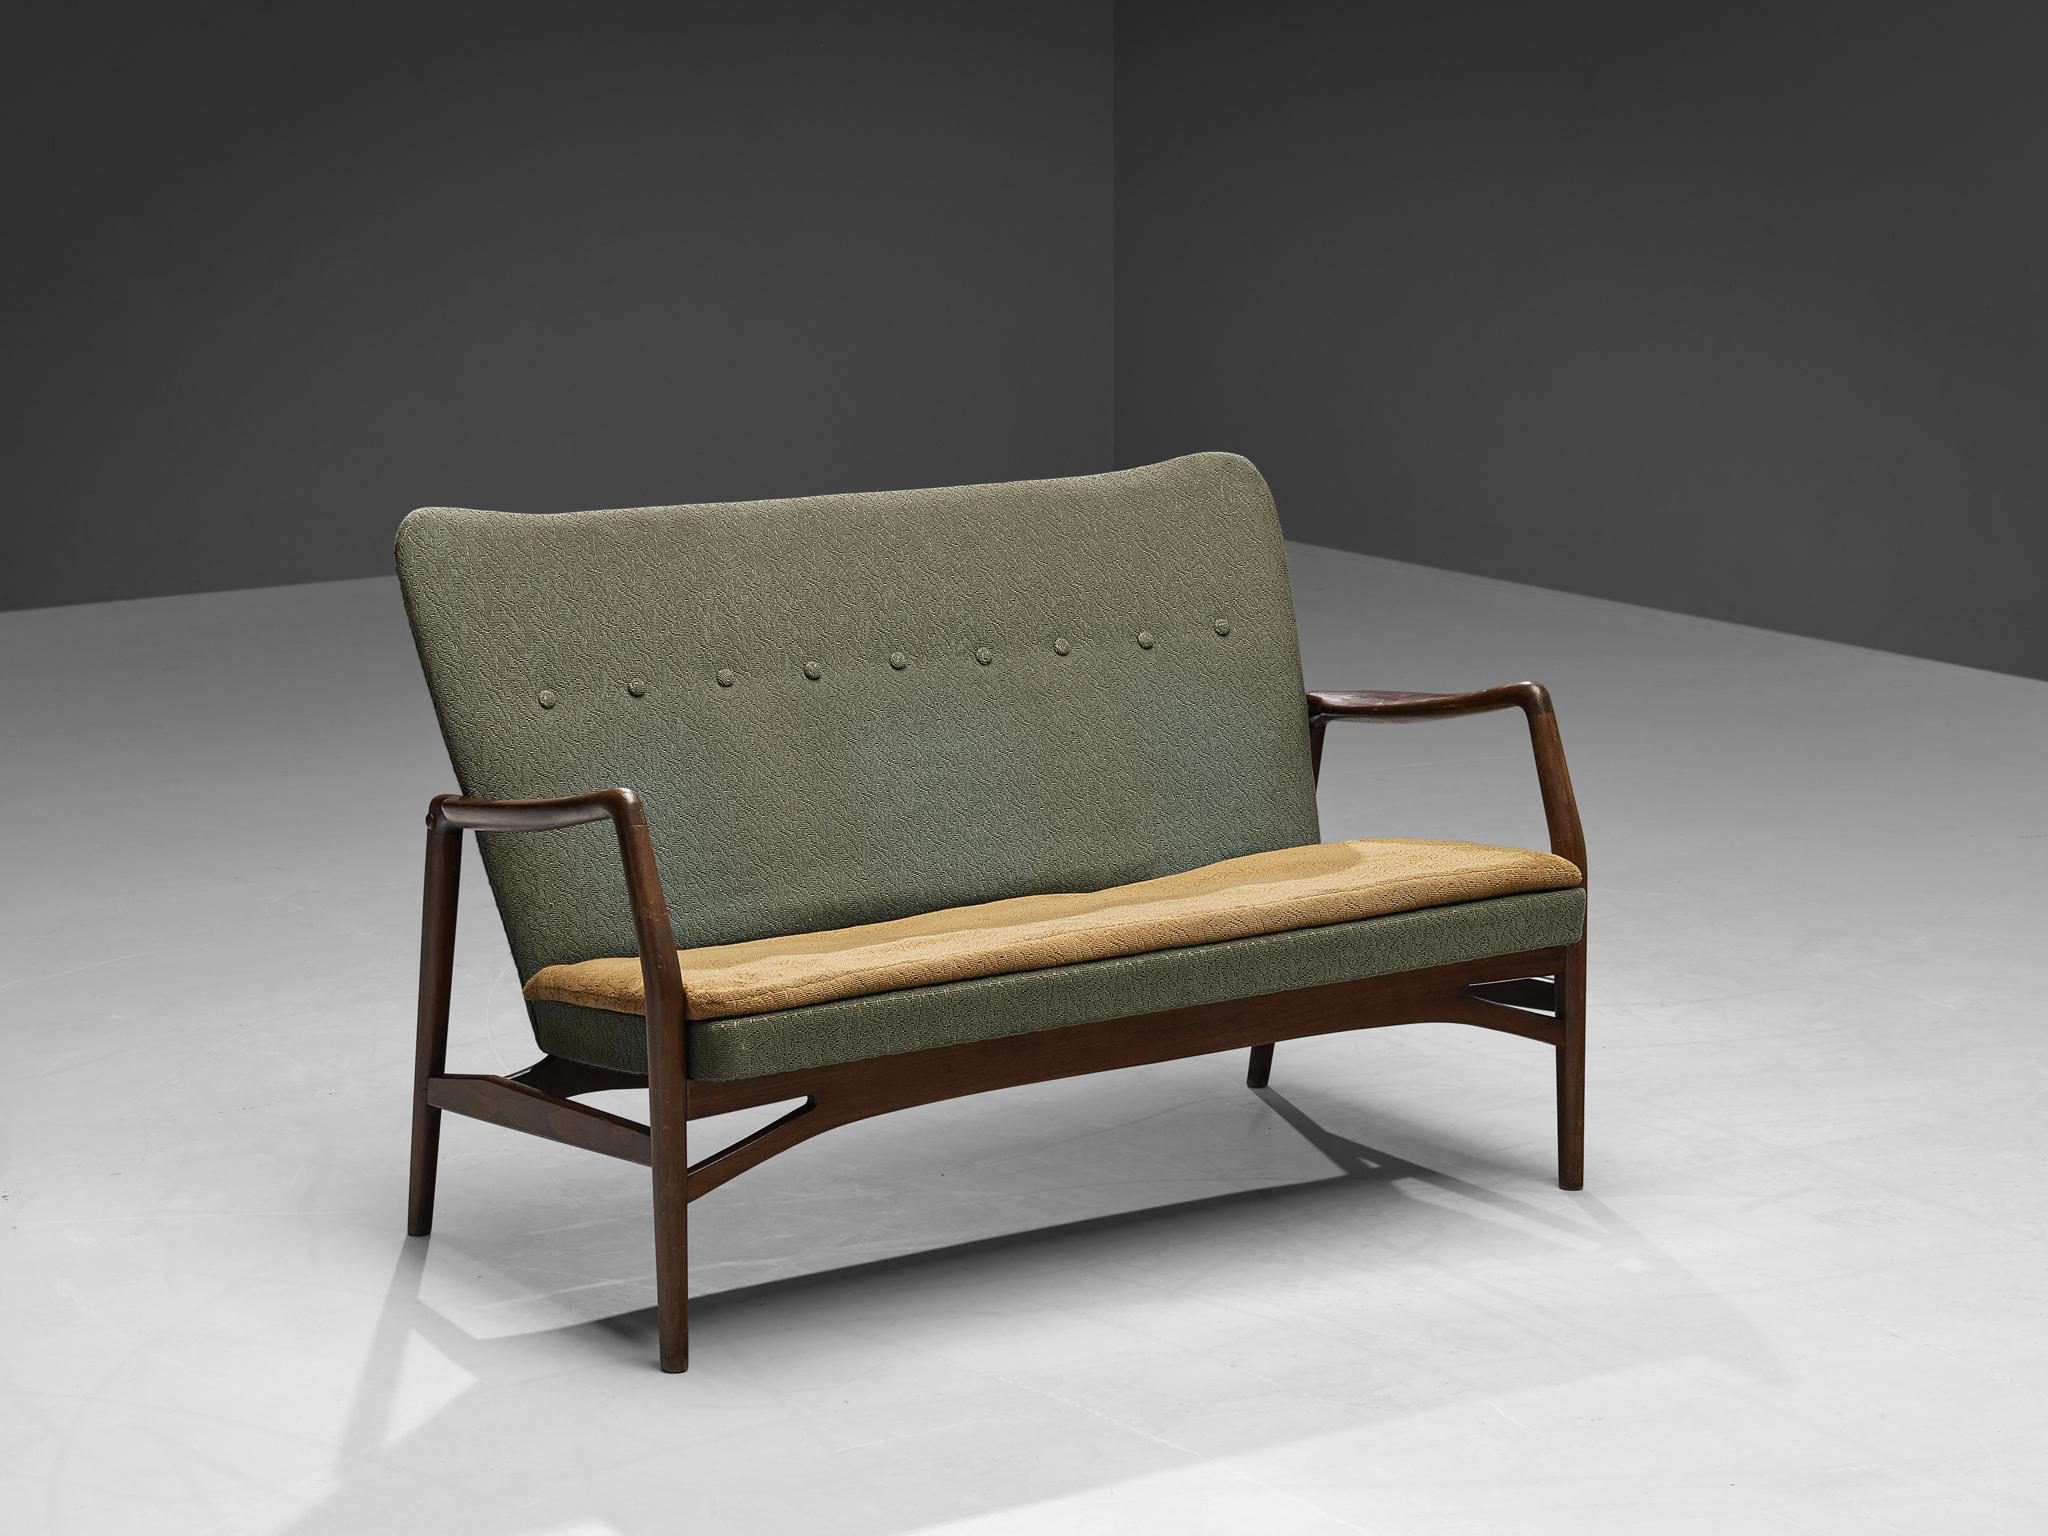 Kurt Olsen for A. Andersen & Bohm, love seat, wood, fabric, Denmark, 1951.

Stunning Danish loveseat designed by Kurt Olsen. This settee has a sculptural quality and light feeling. This is especially created by the floating wooden armrests and the